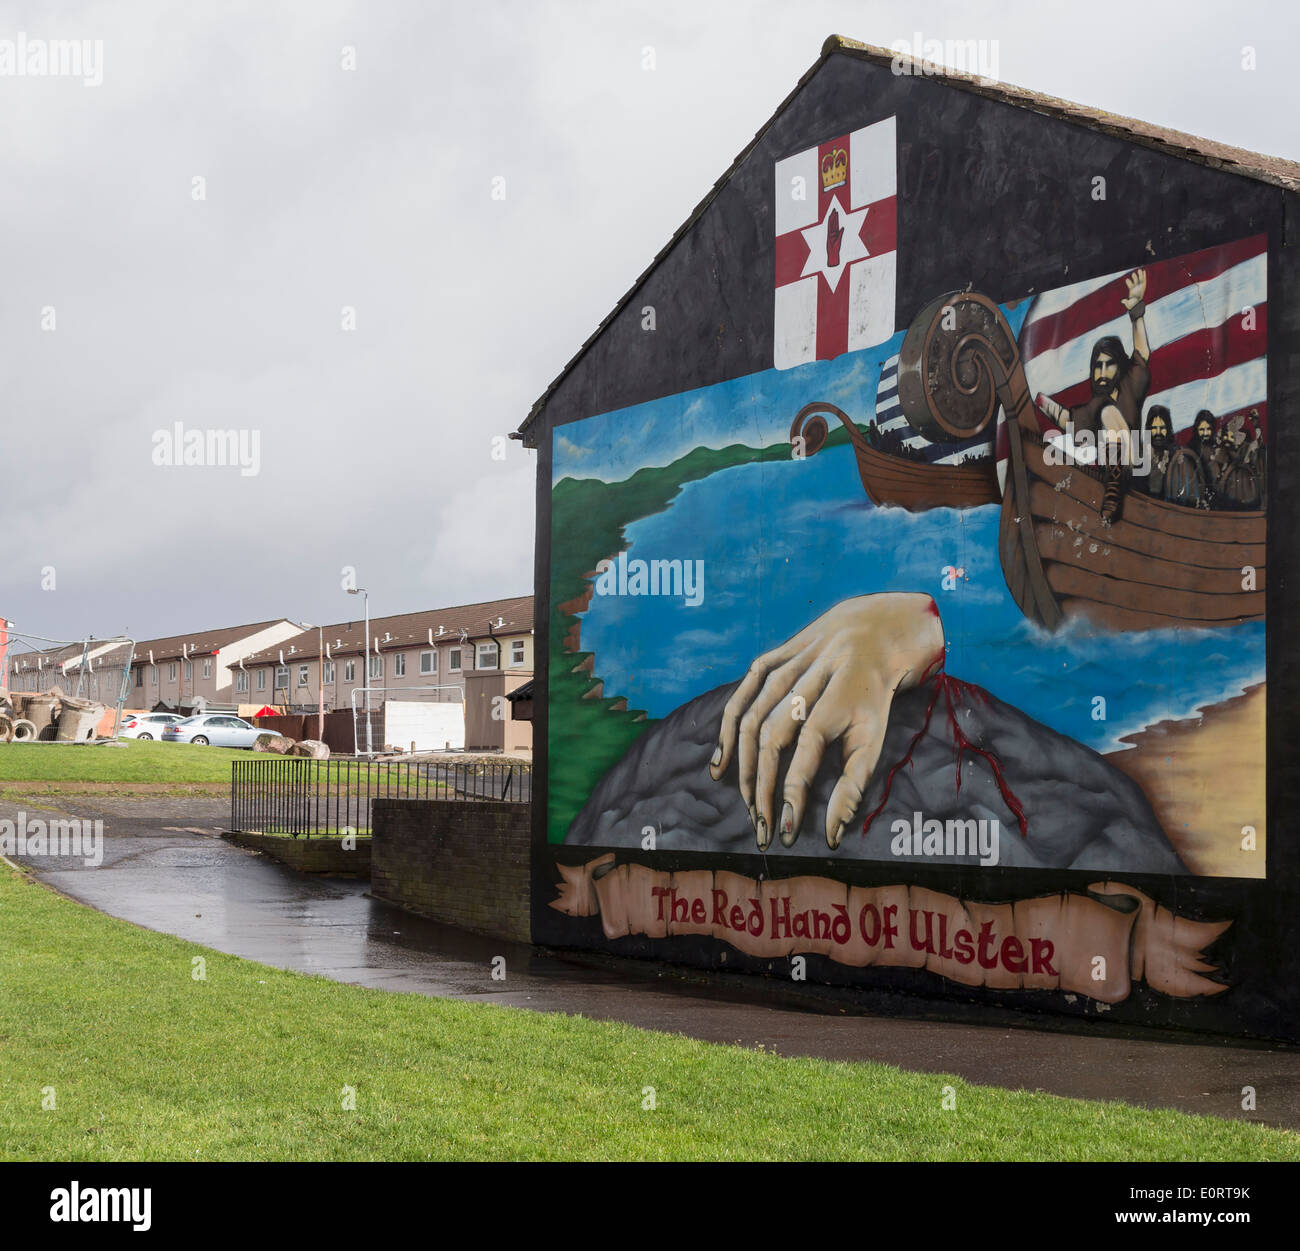 Wall painting of the Red Hand of Ulster on side of house in Belfast, Northern Ireland Stock Photo